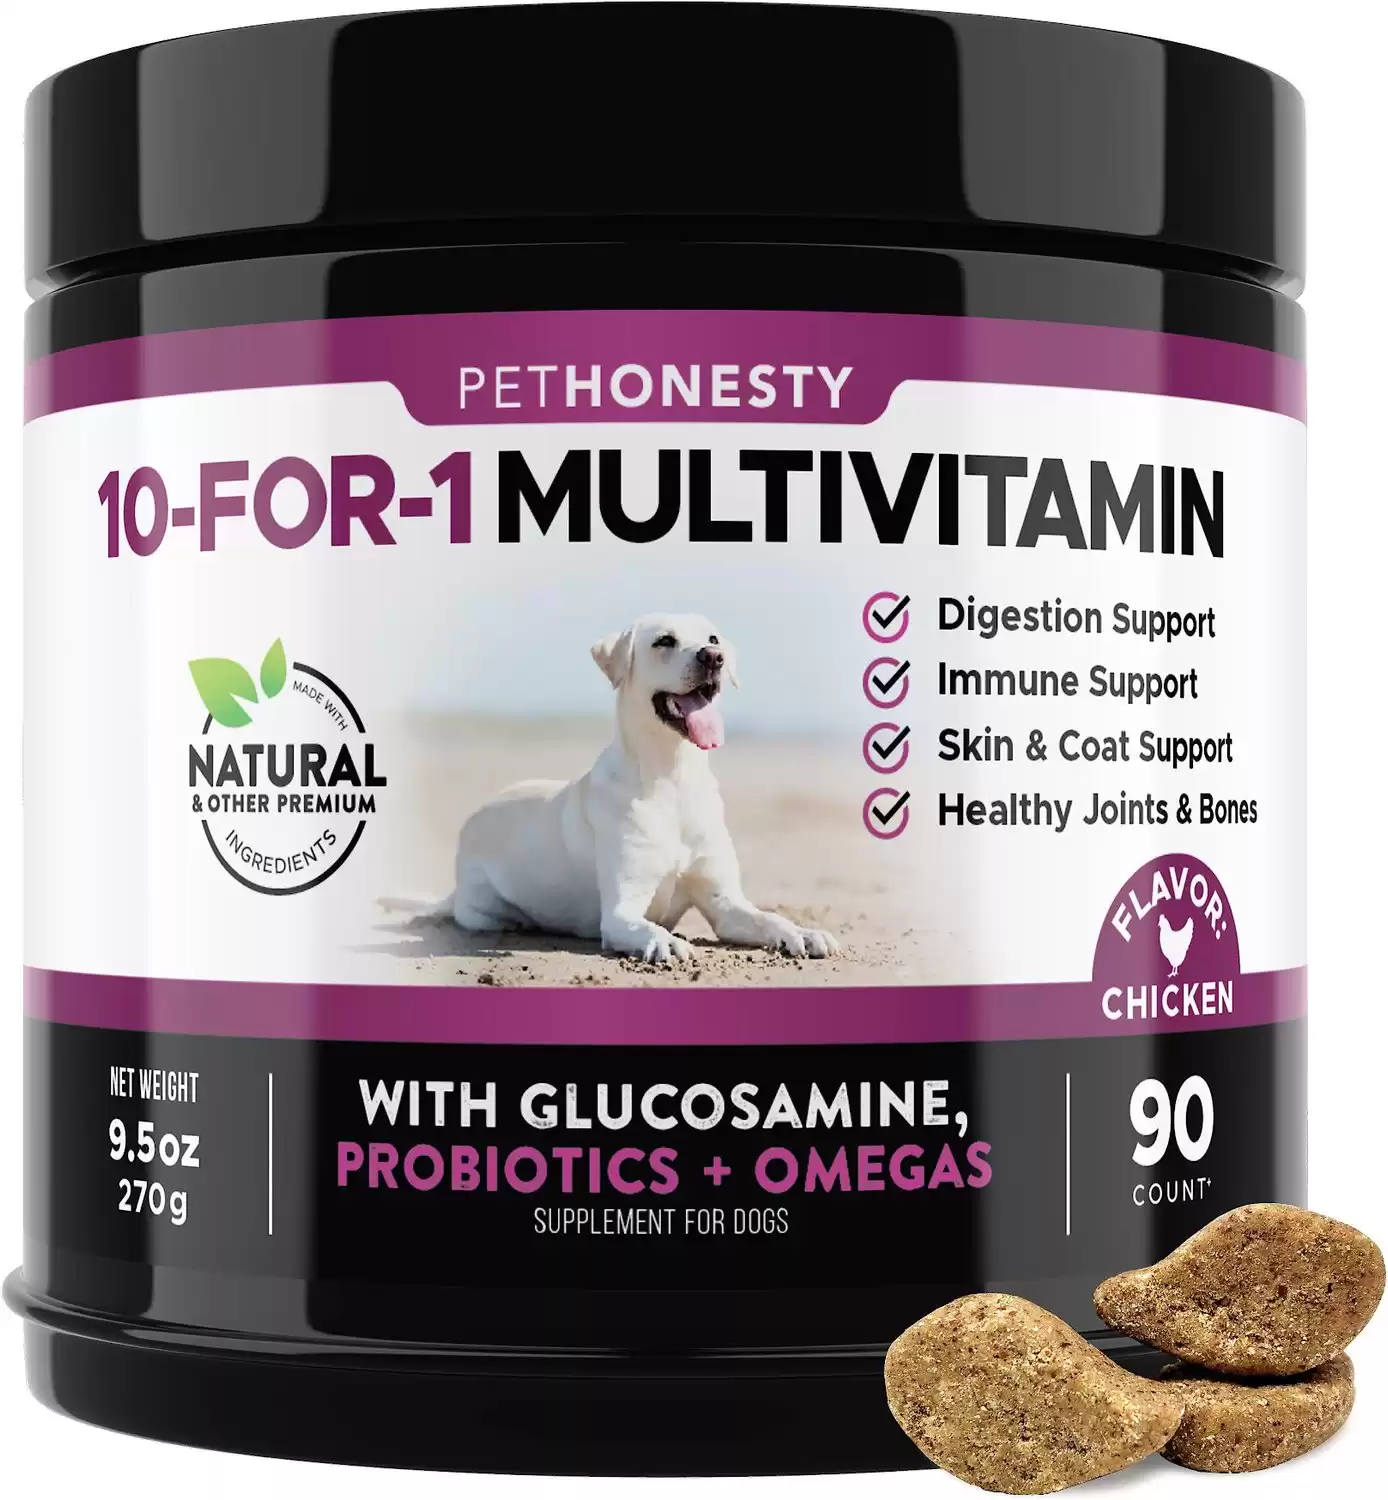 PetHonesty 10-for-1 Chicken Flavored Soft Chews Multivitamin for Dogs